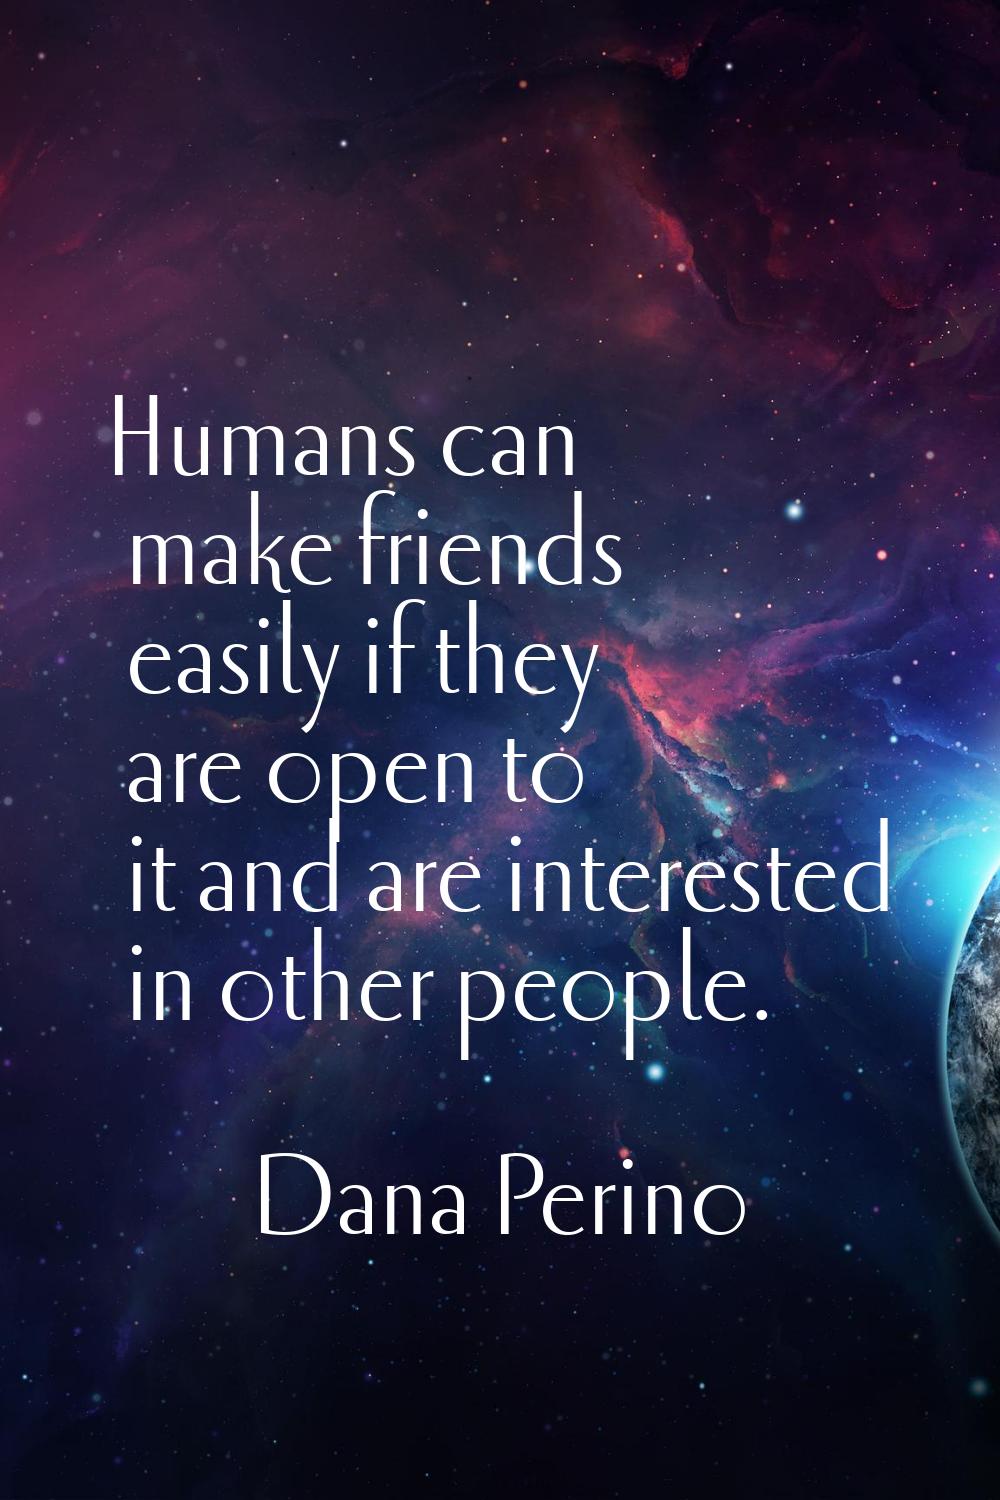 Humans can make friends easily if they are open to it and are interested in other people.